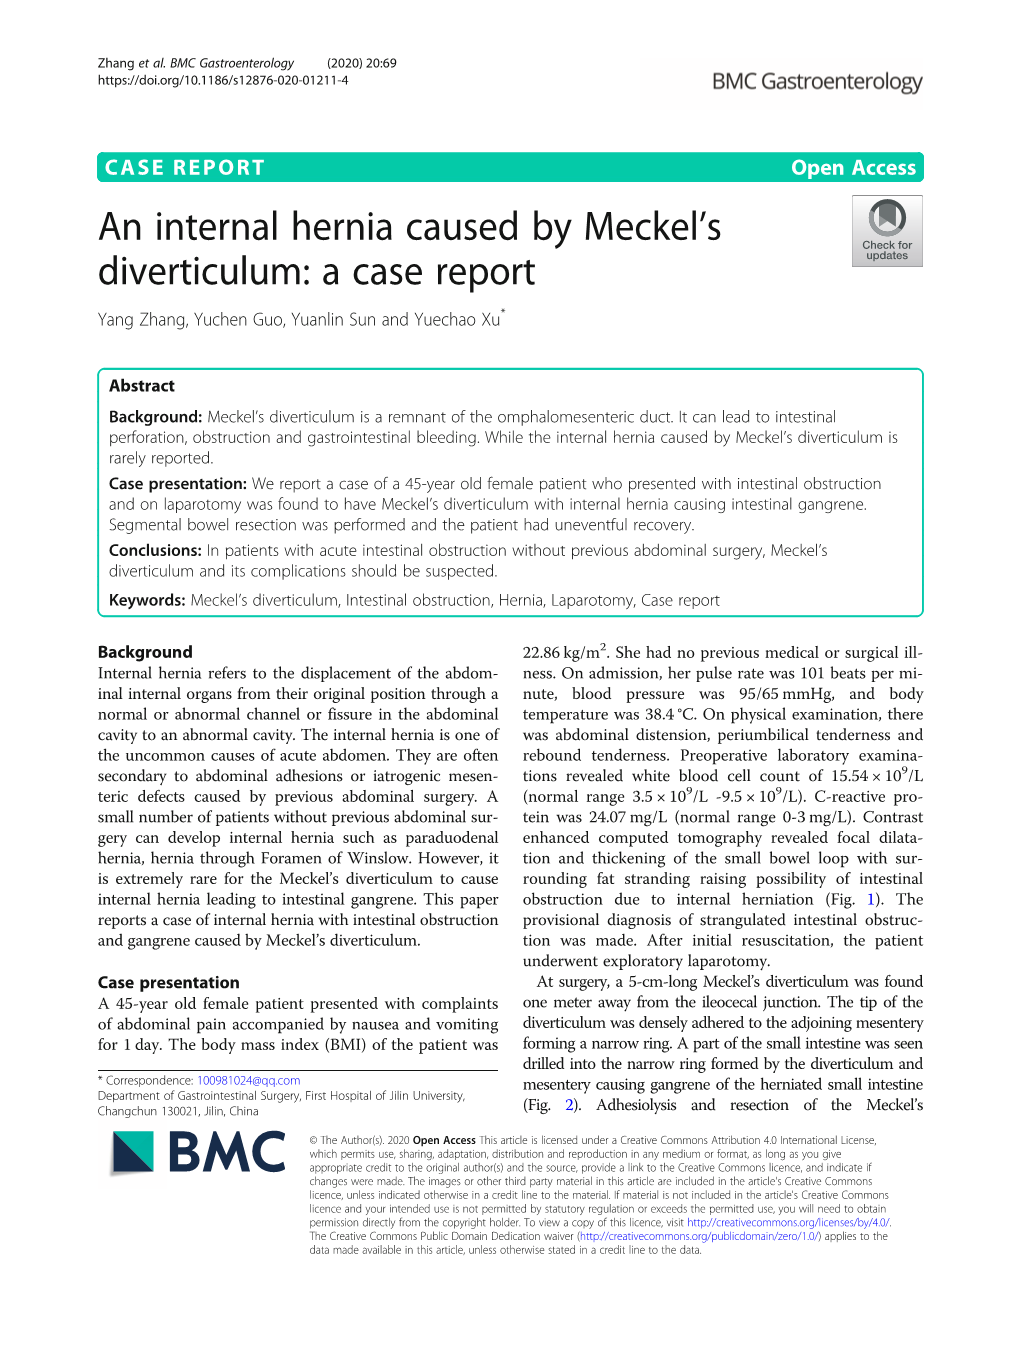 An Internal Hernia Caused by Meckel's Diverticulum